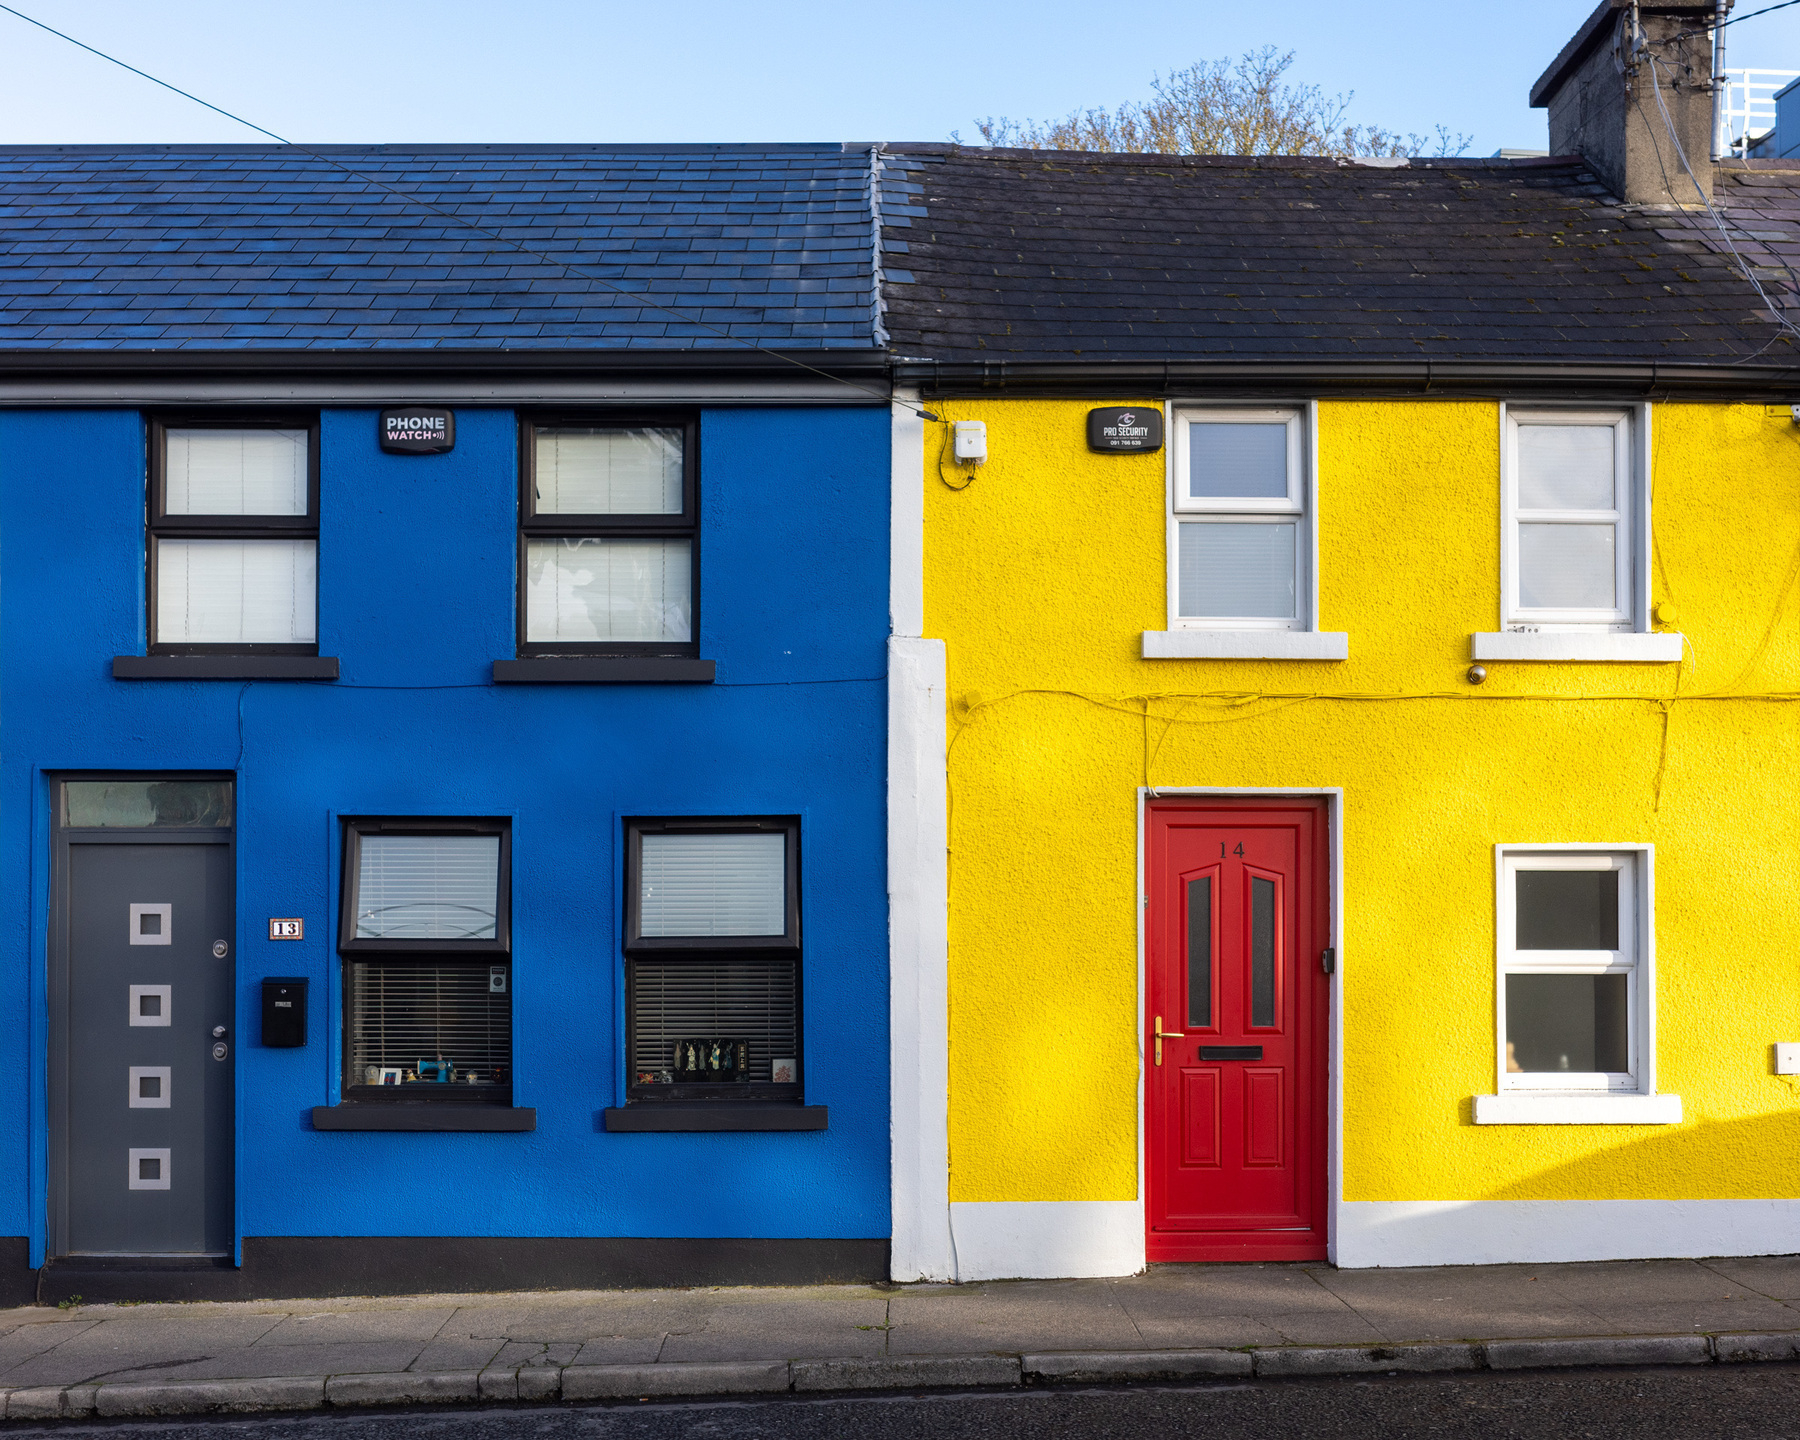 A pair of terrace houses. The one of the left is painted blue, the one on the right is painted yellow and has a red door. They are two storeys tall with two windows on the top storey.